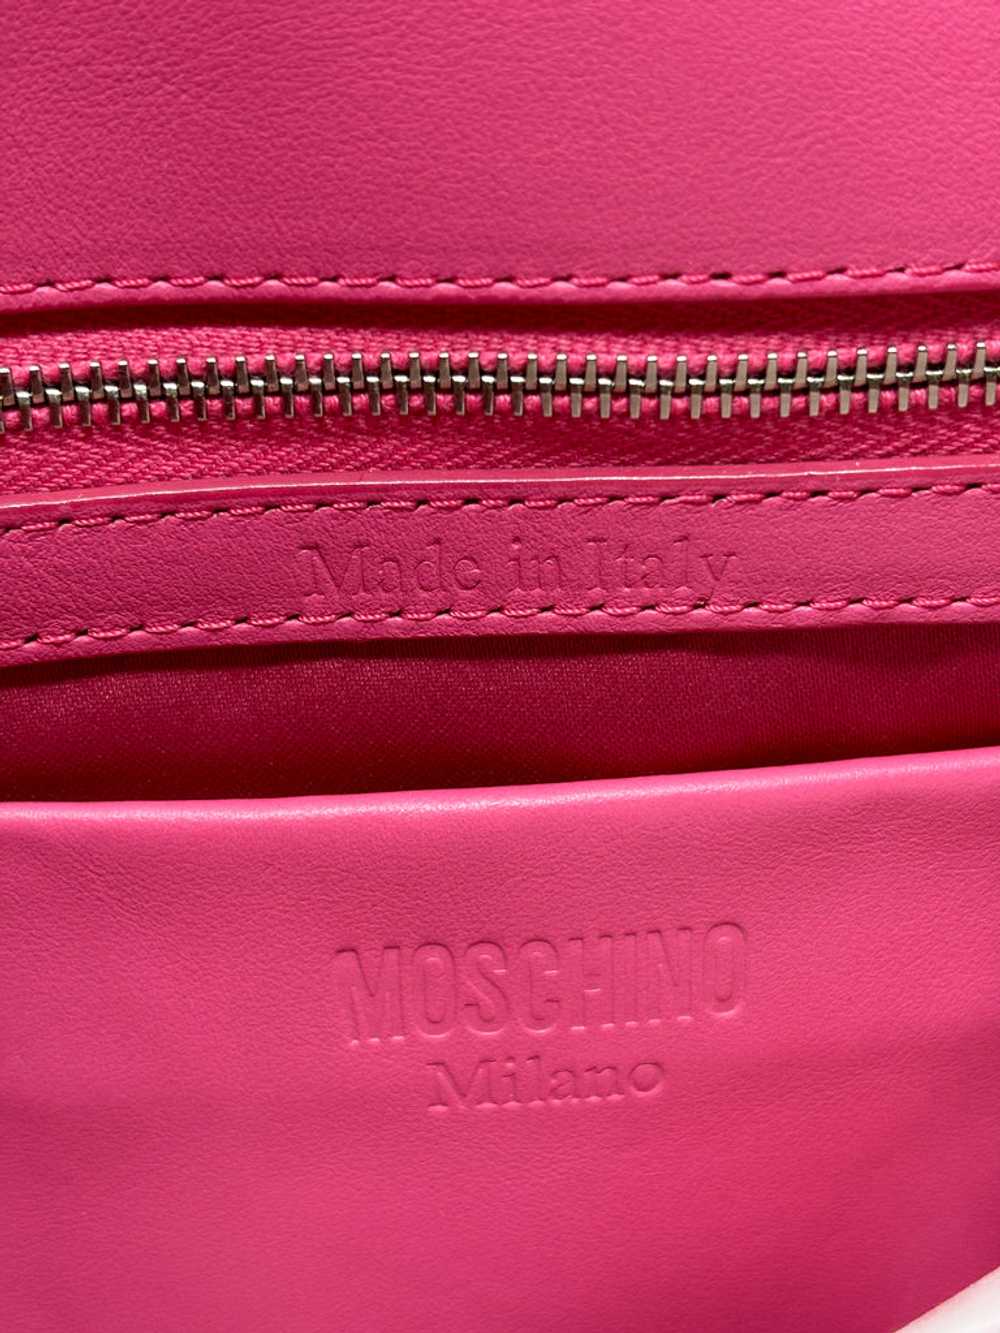 Moschino Barbie Pink Saffiano Leather Clutch with… - image 6